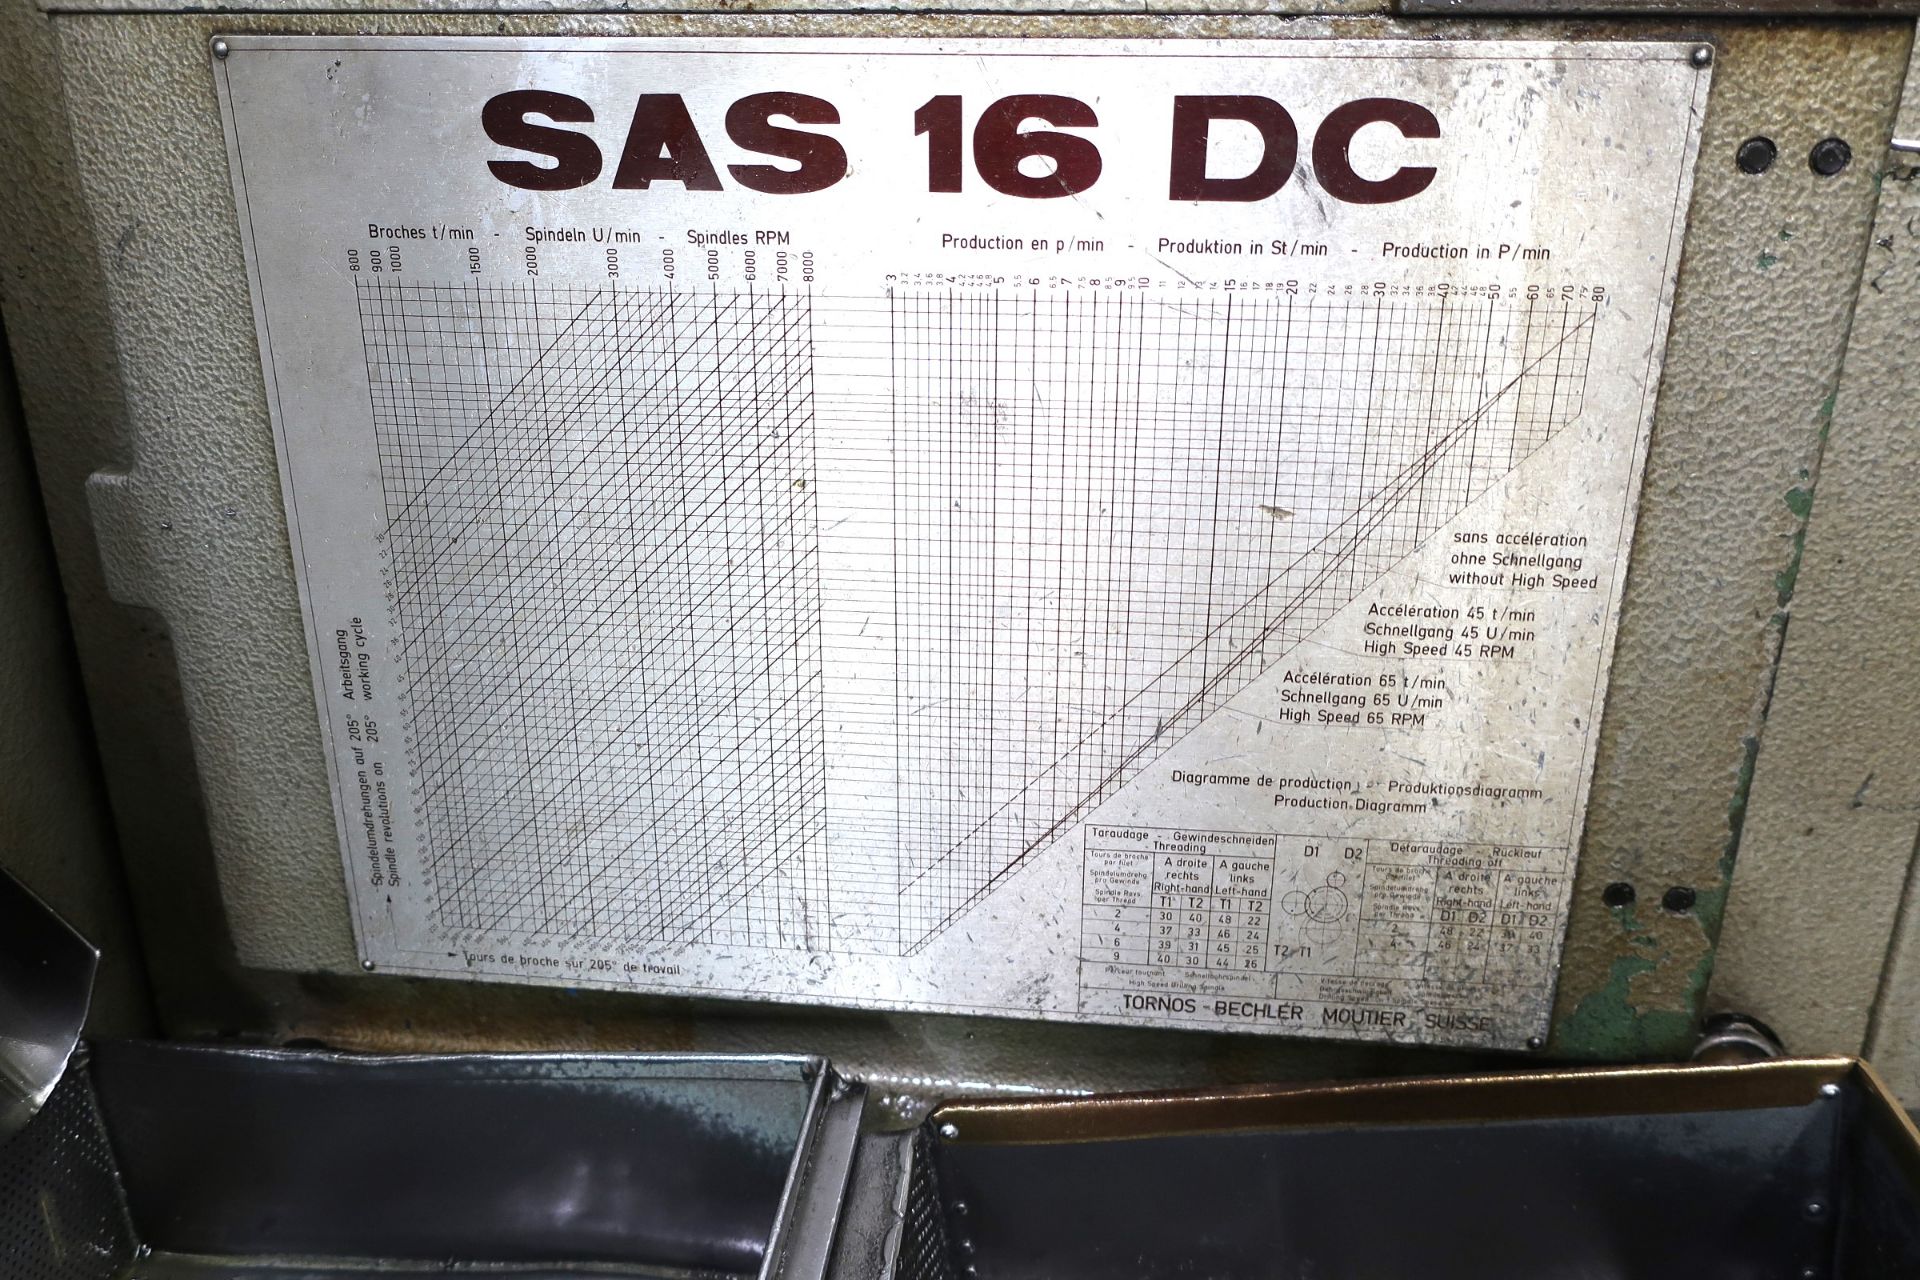 Tornos SAS-16-DC Multiple Spindle Automatic Bar Machine, S/N T59441 - Image 2 of 13